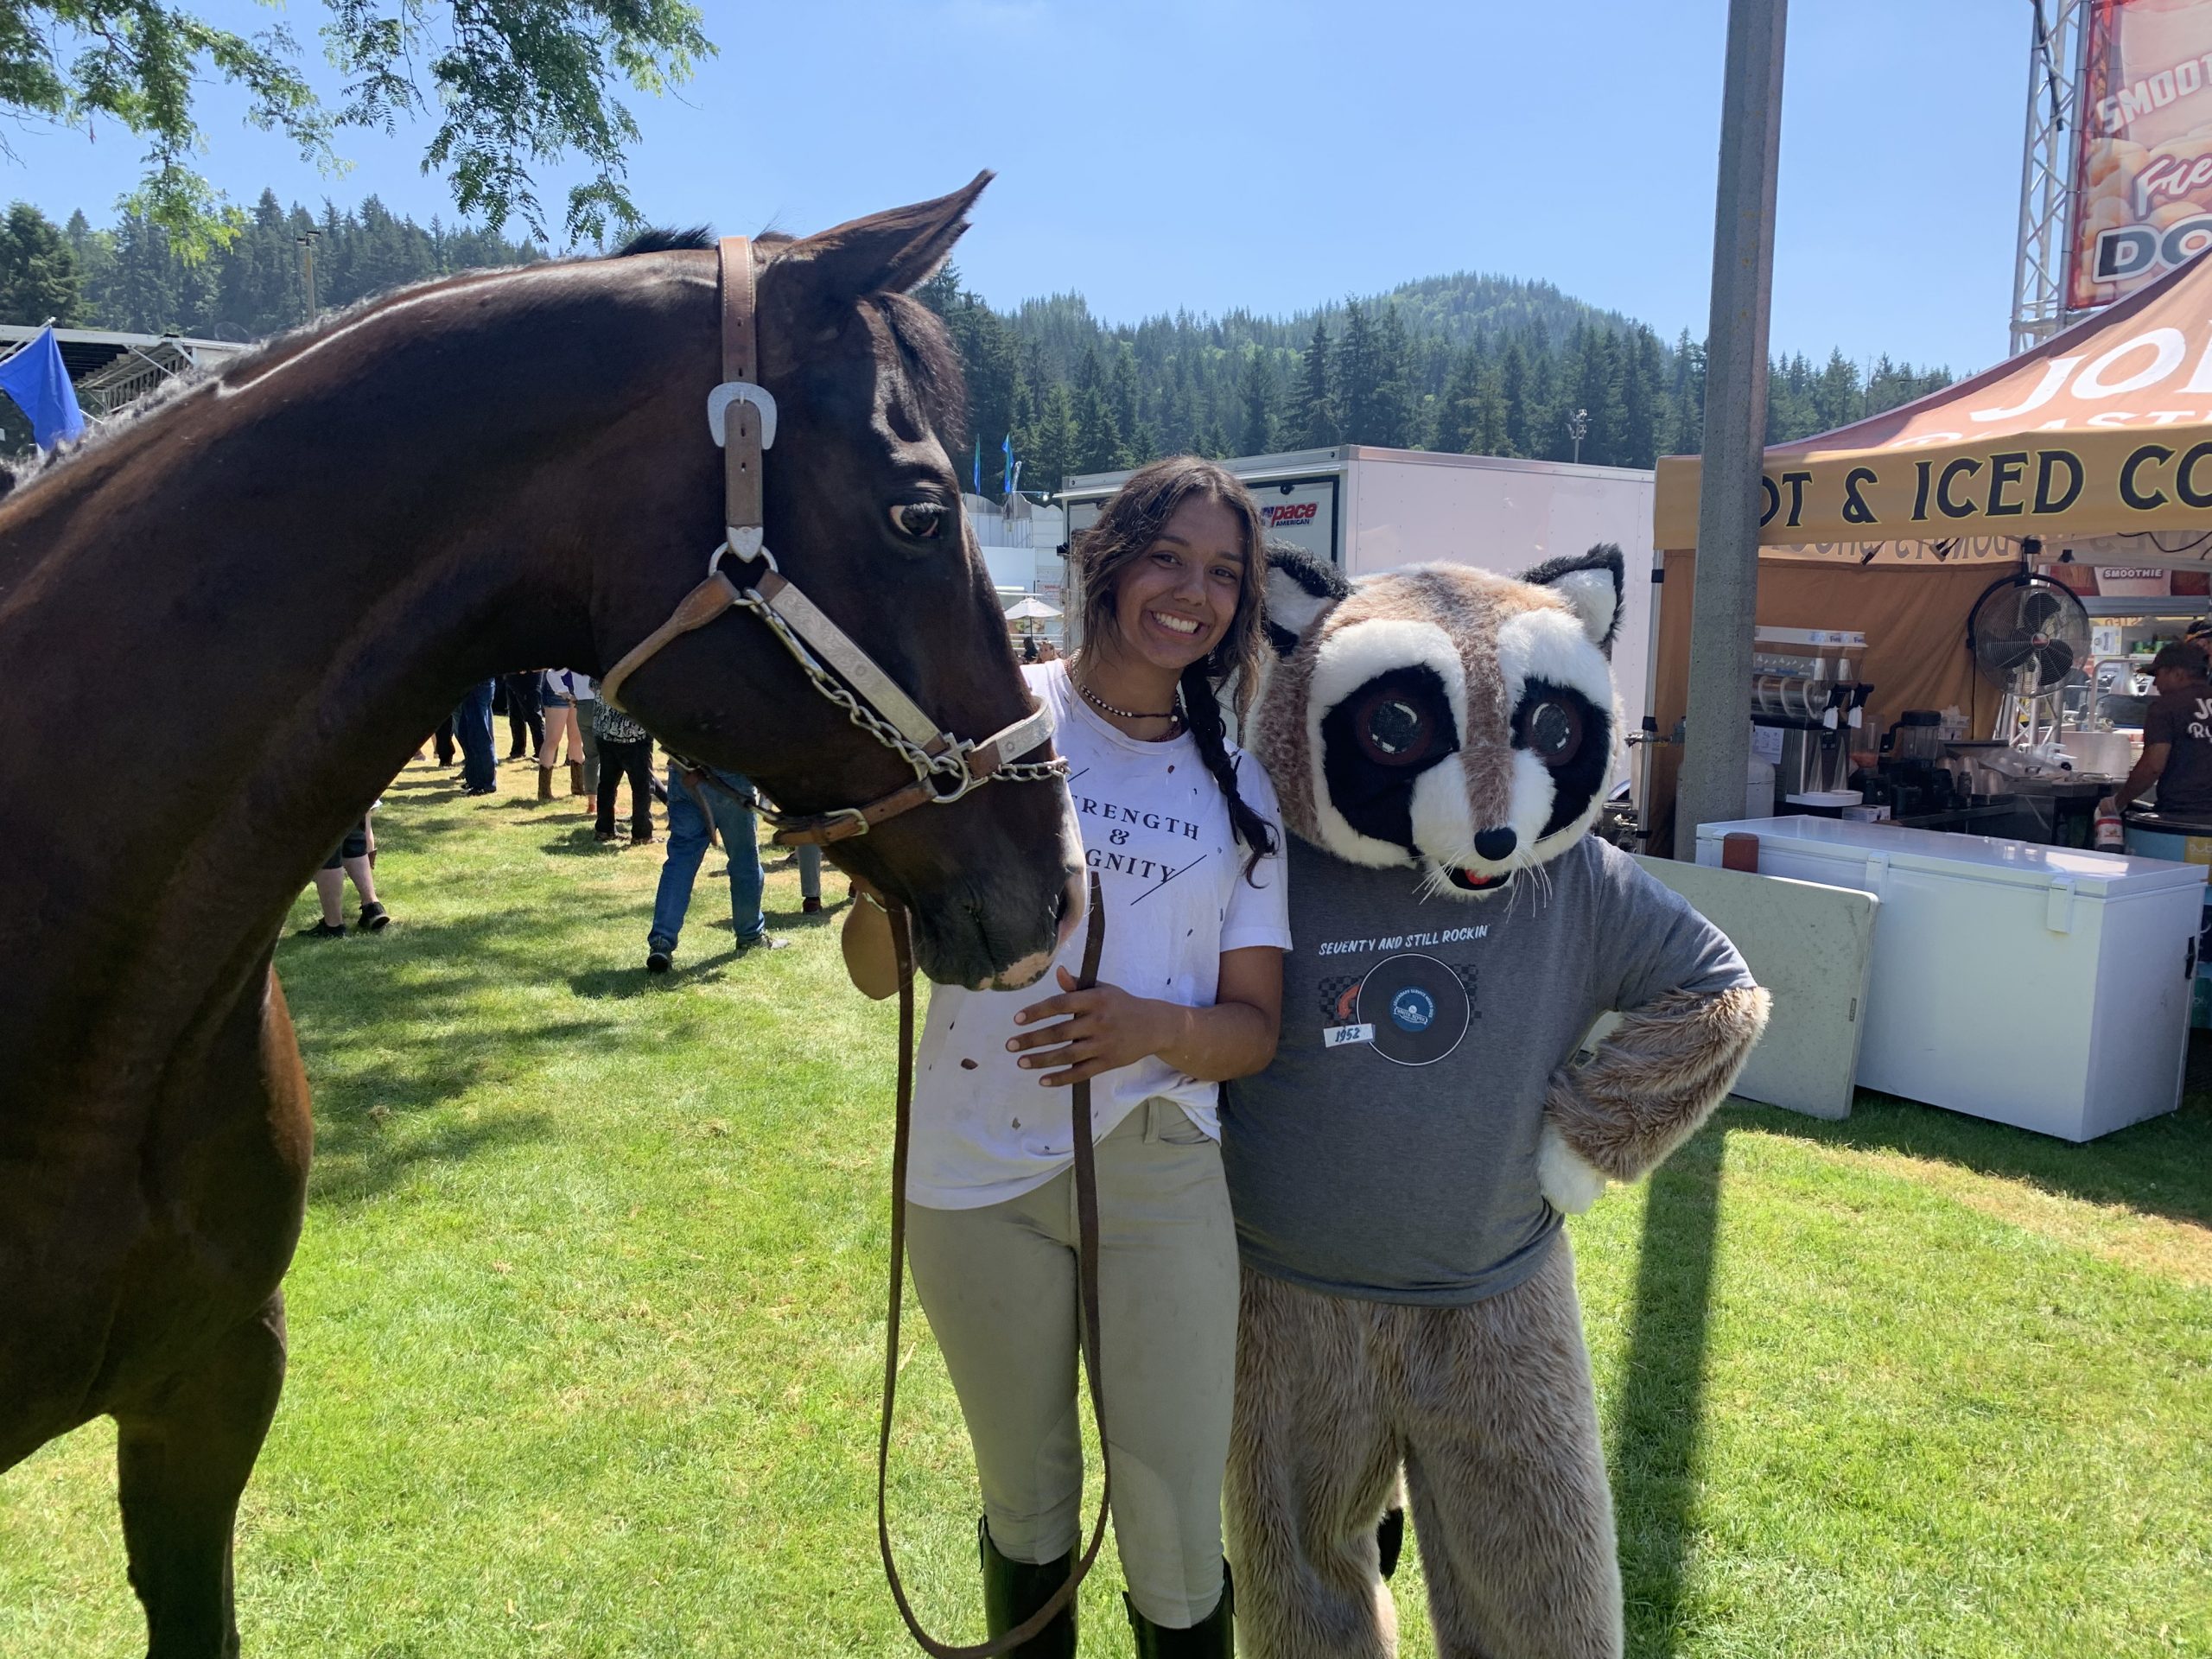 Rocky Raccoon next to a horse